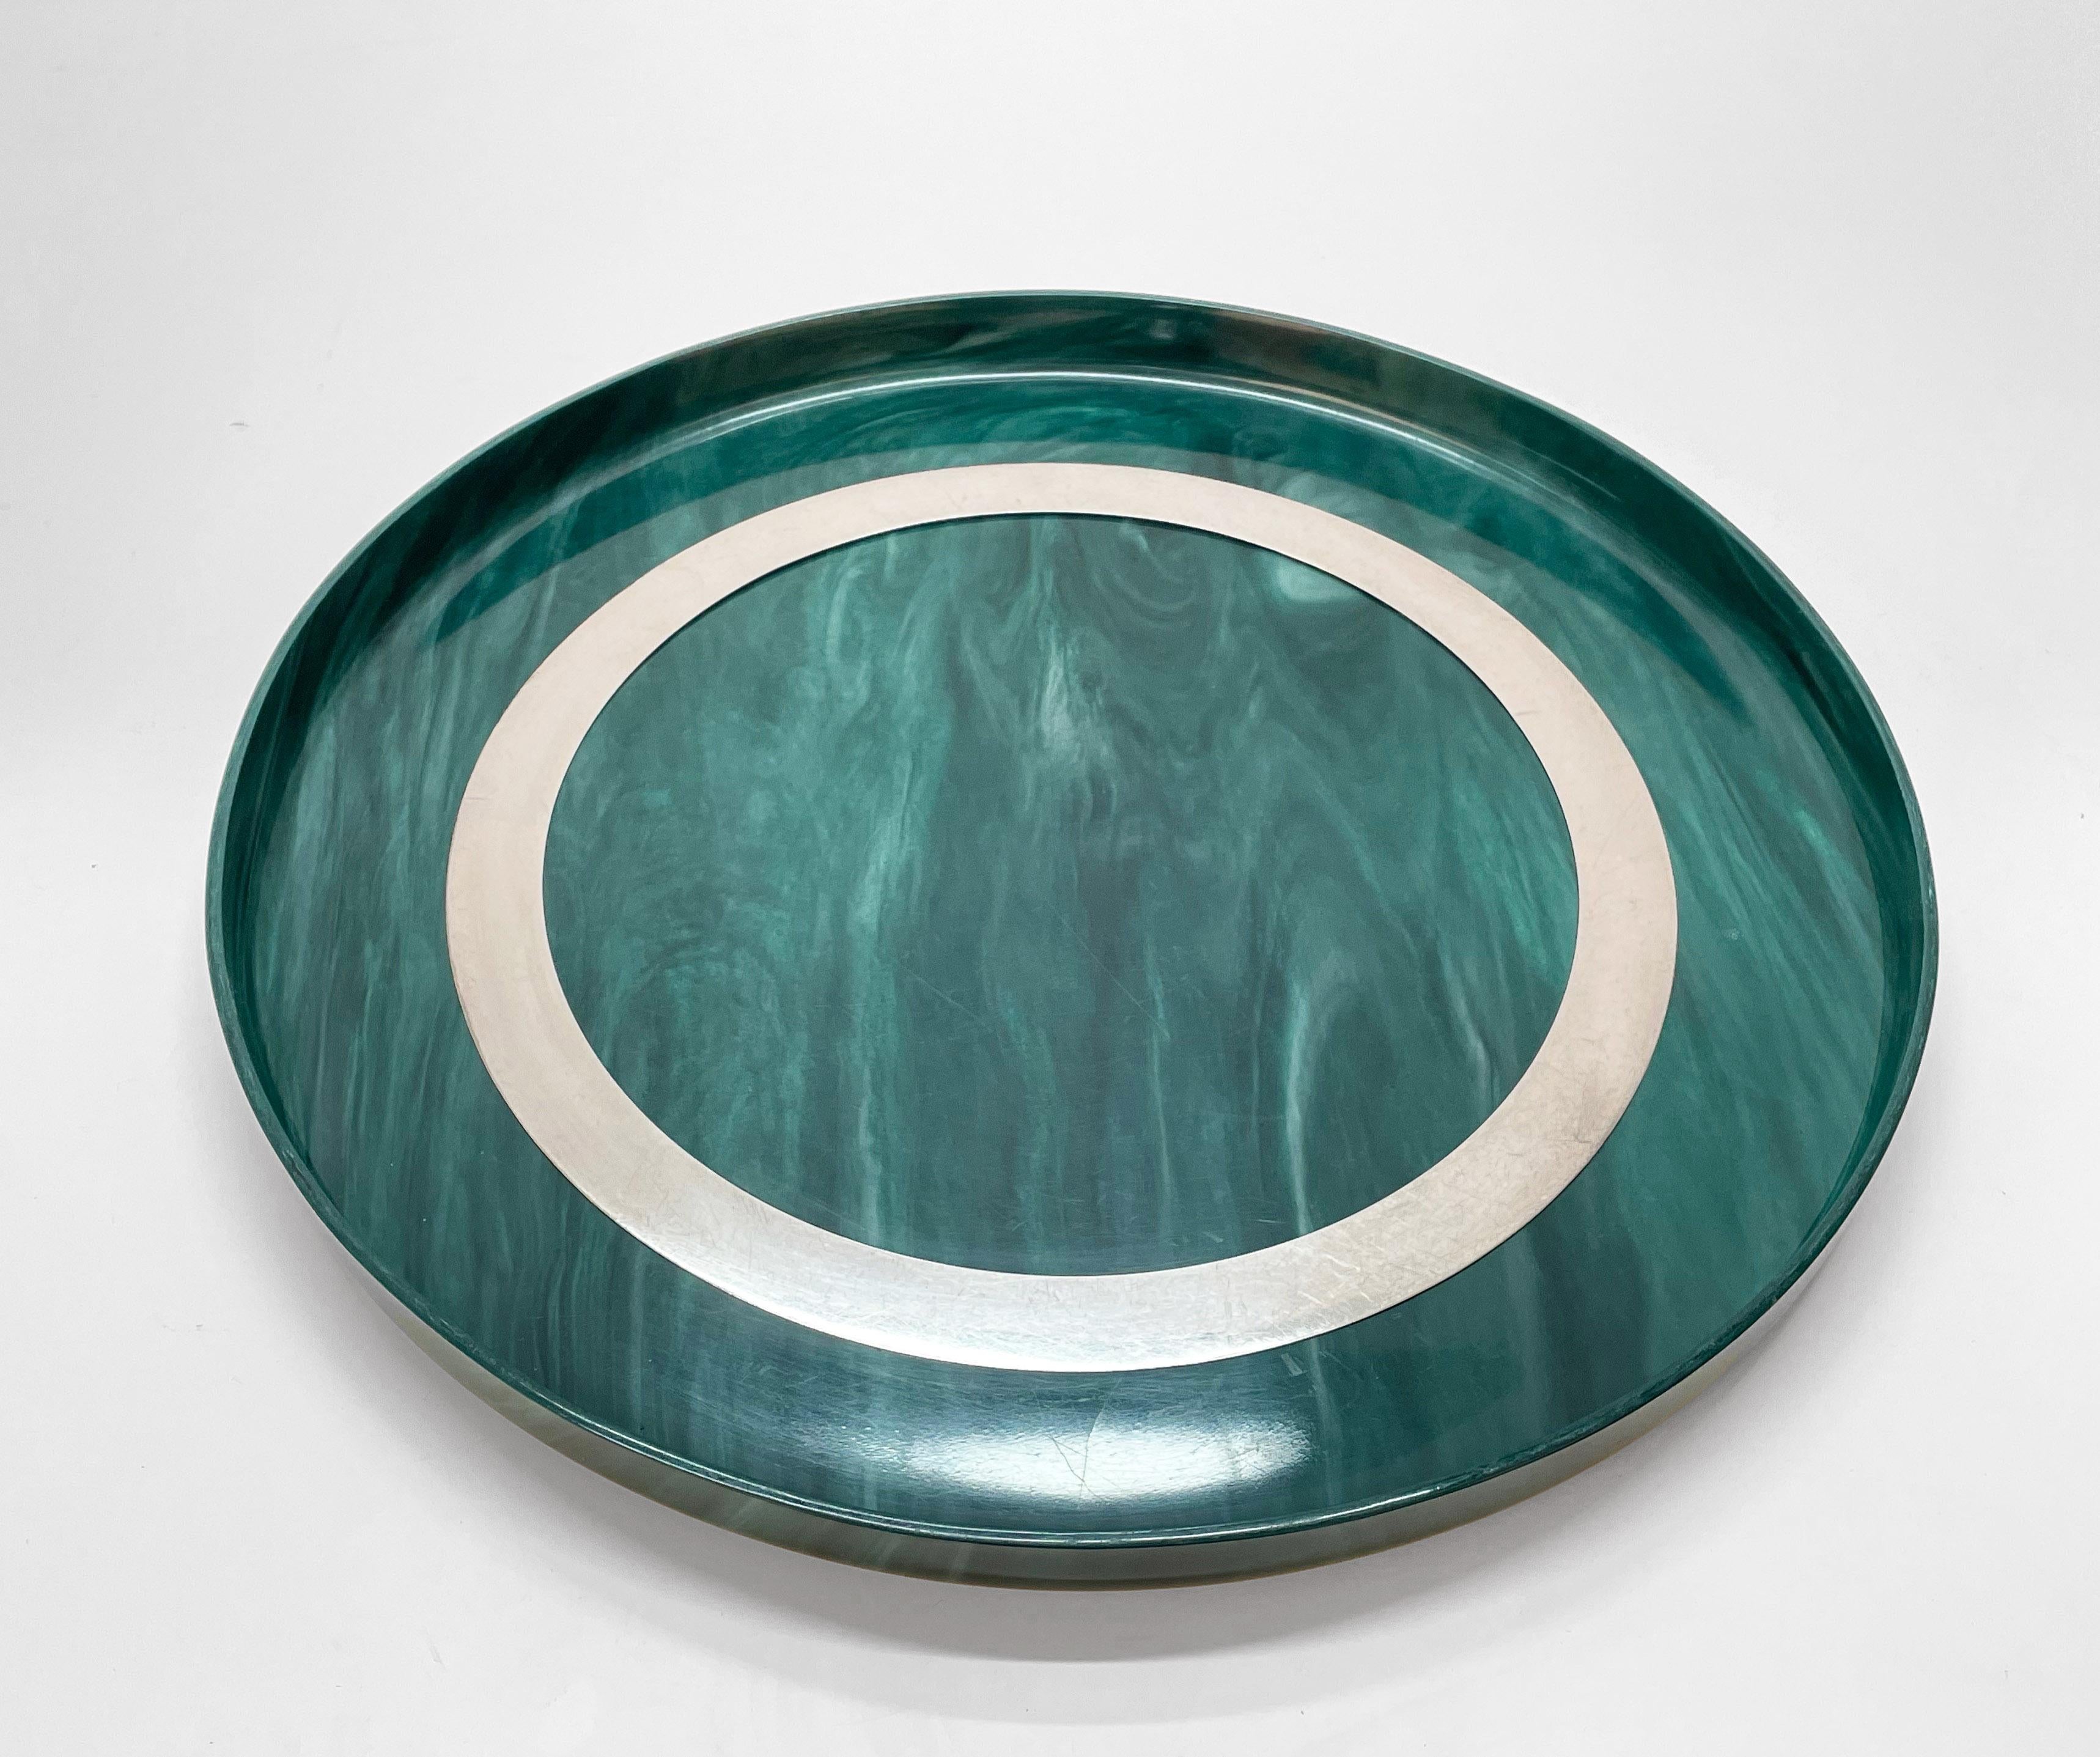 Midcentury Large Round GreenBakelite and Steel Italian Round Serving Tray, 1980s For Sale 3